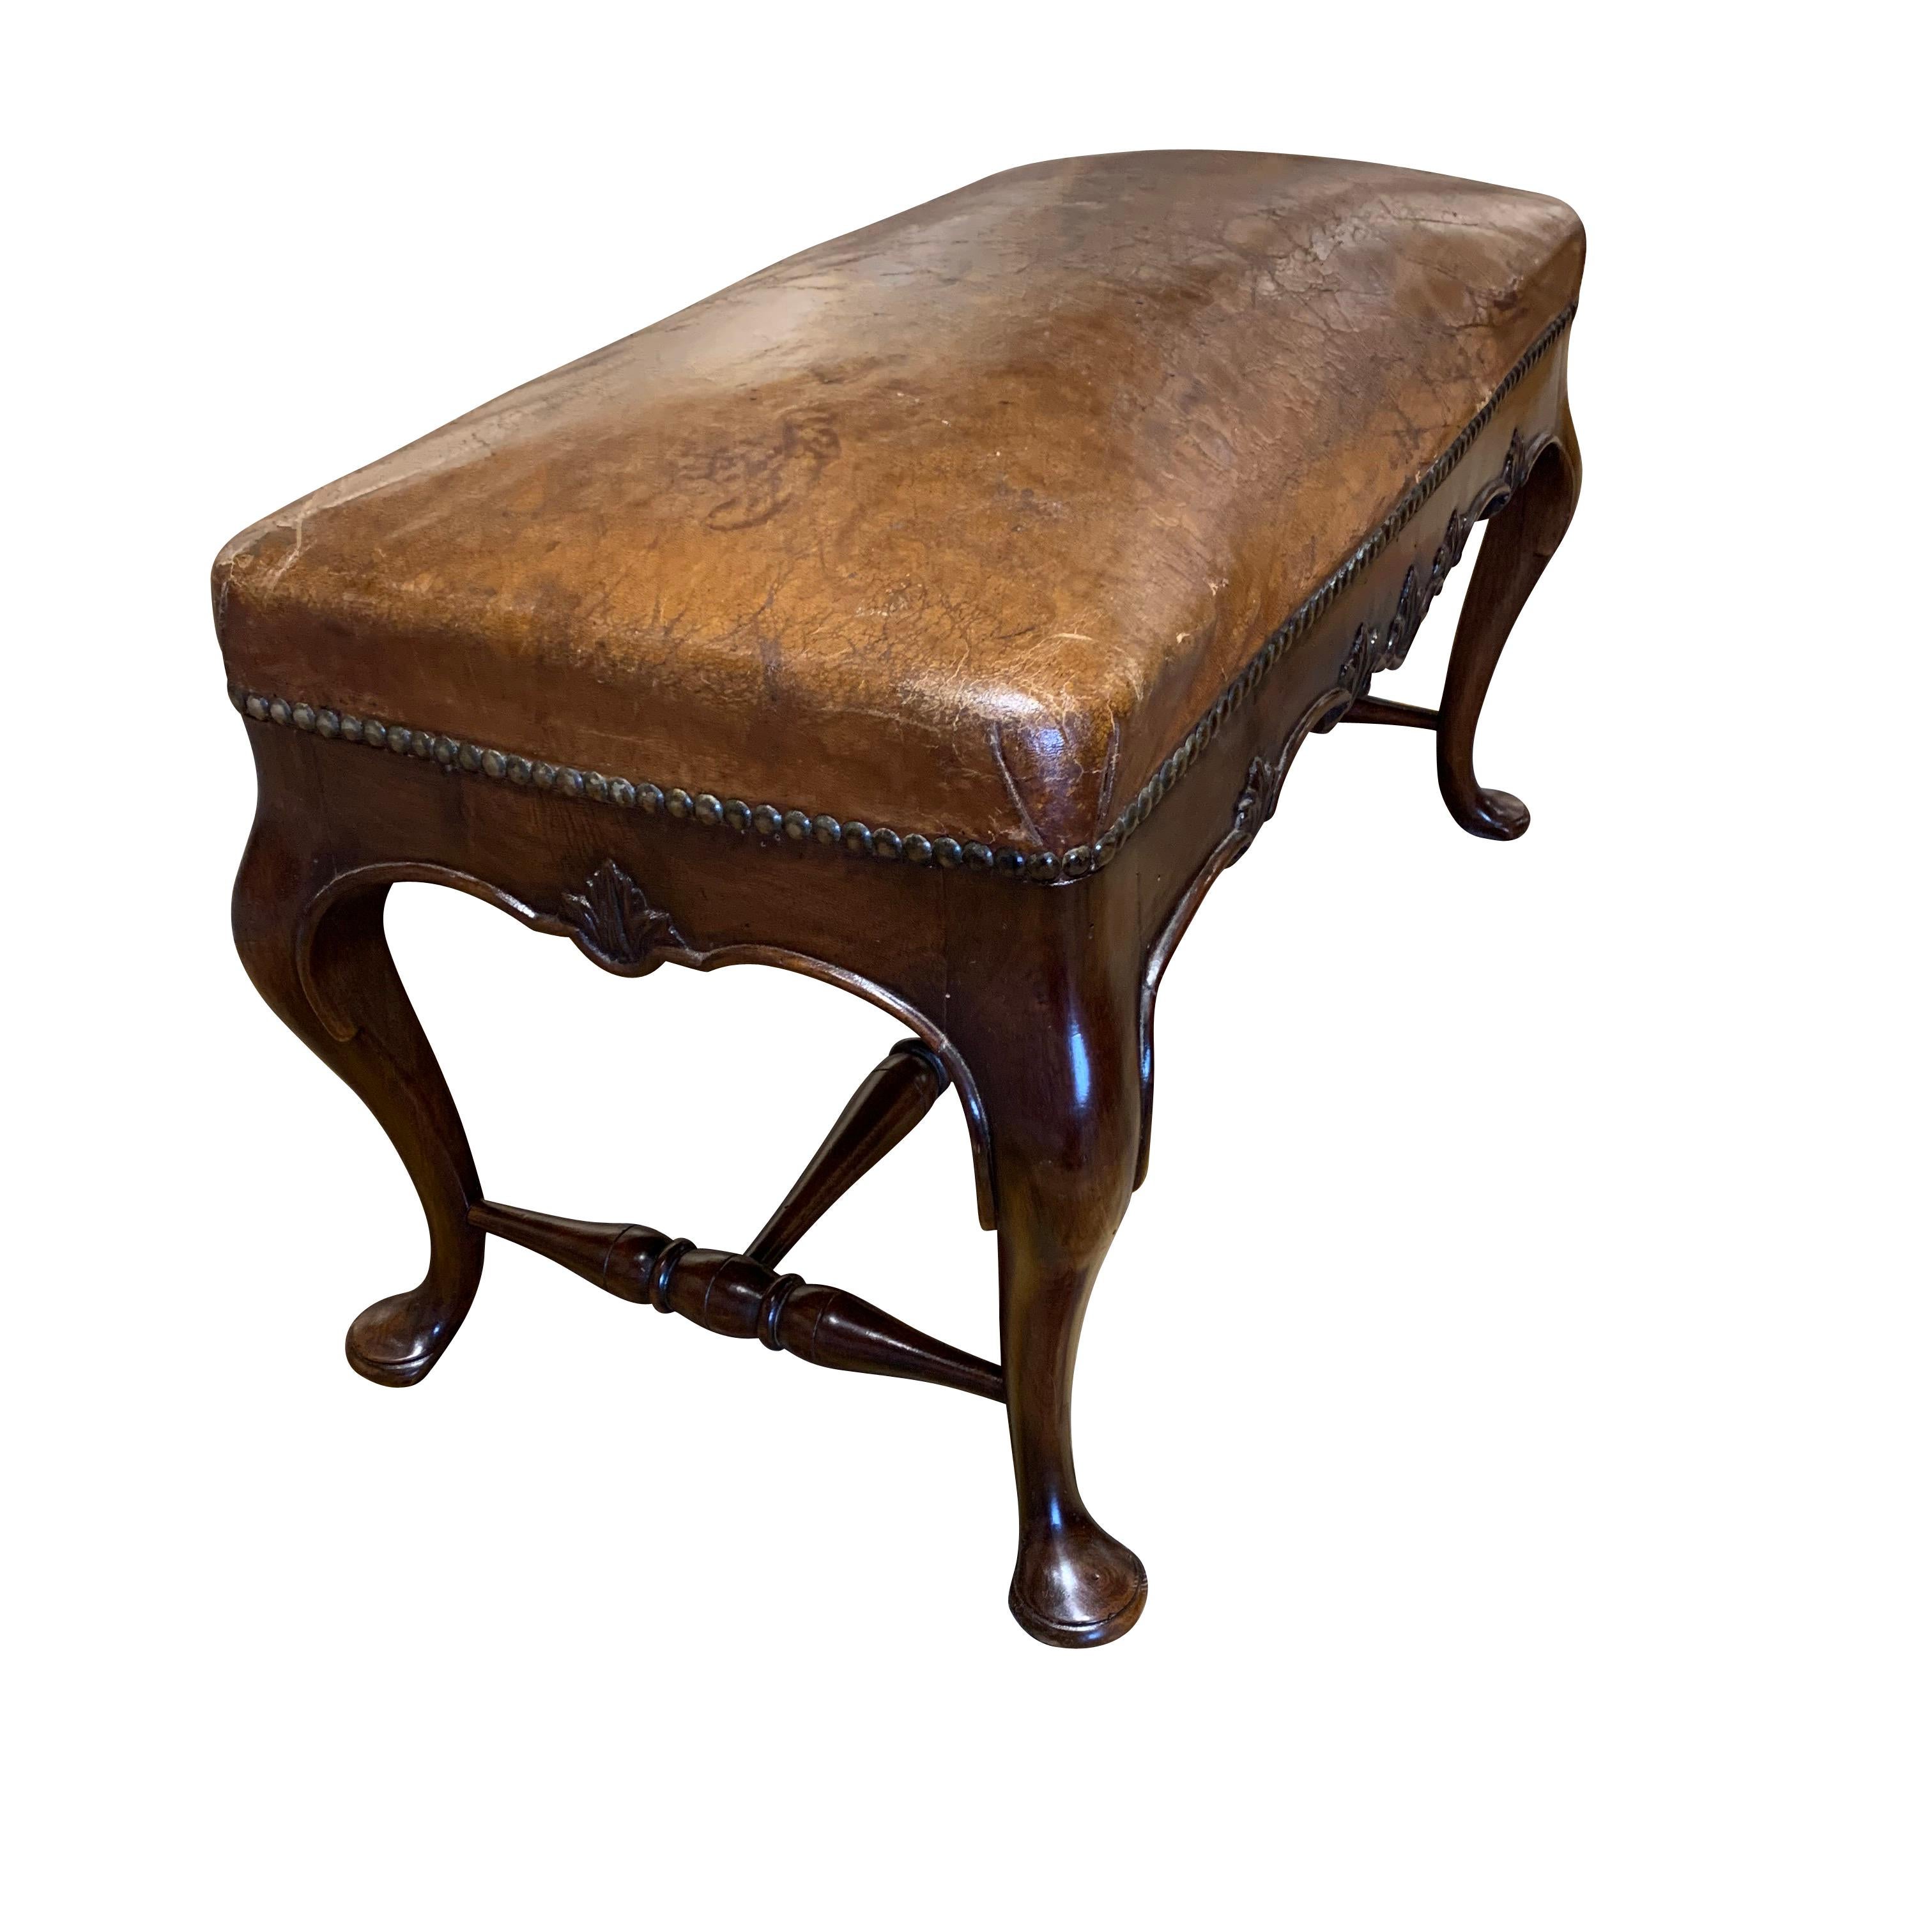 English Leather Top Bench, England, 19th Century